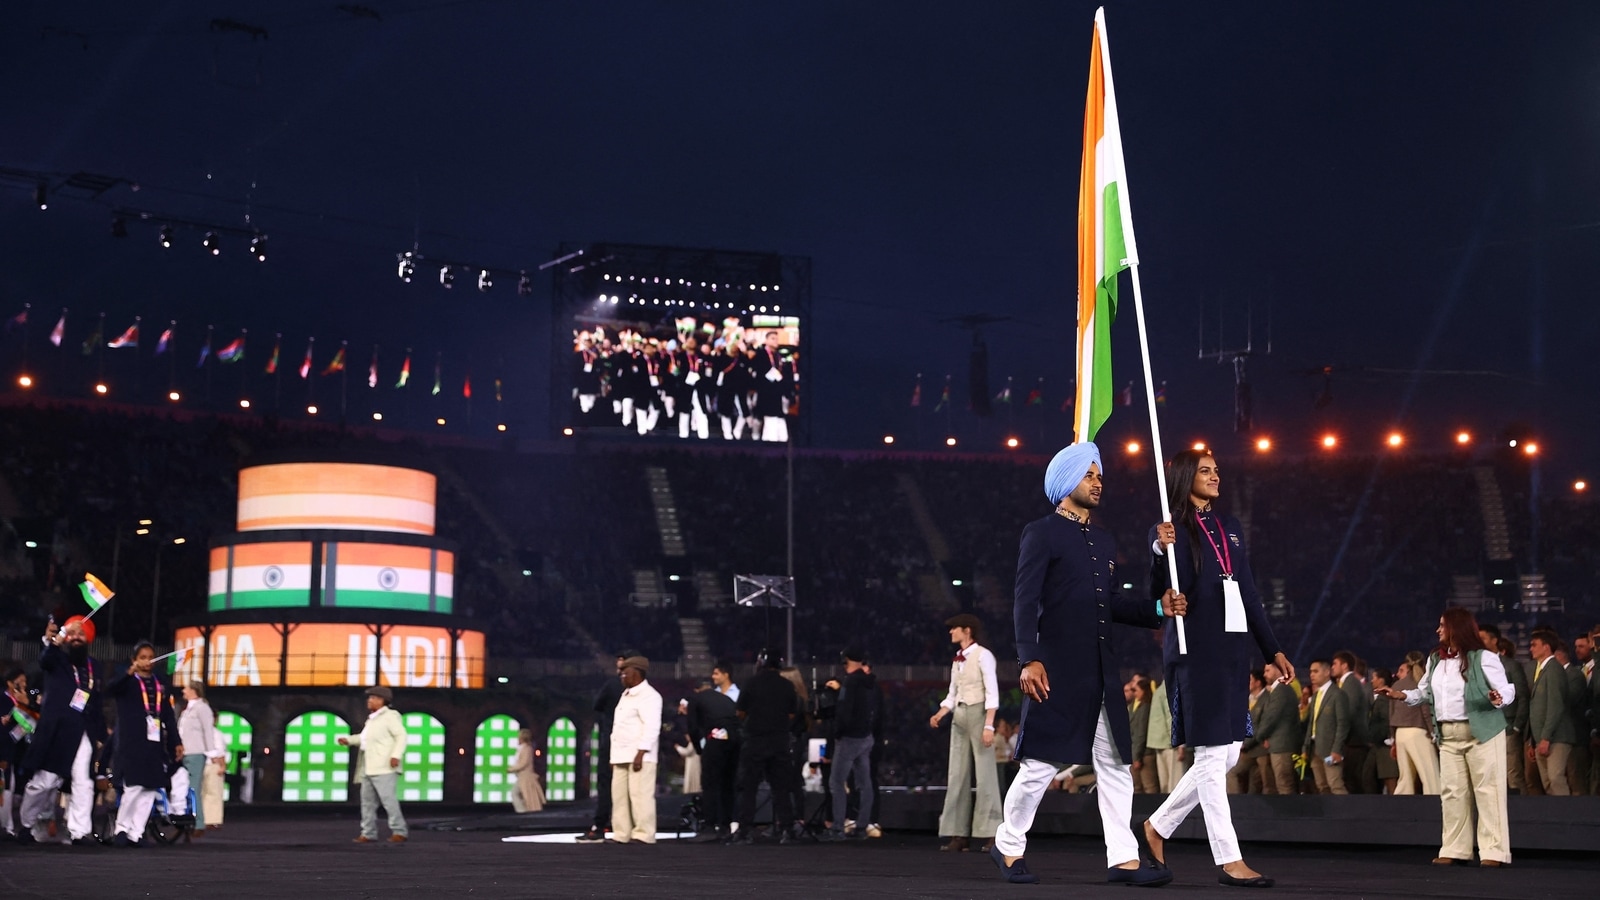 Commonwealth Games 2022 Highlights 22nd CWG declared open, Sindhu